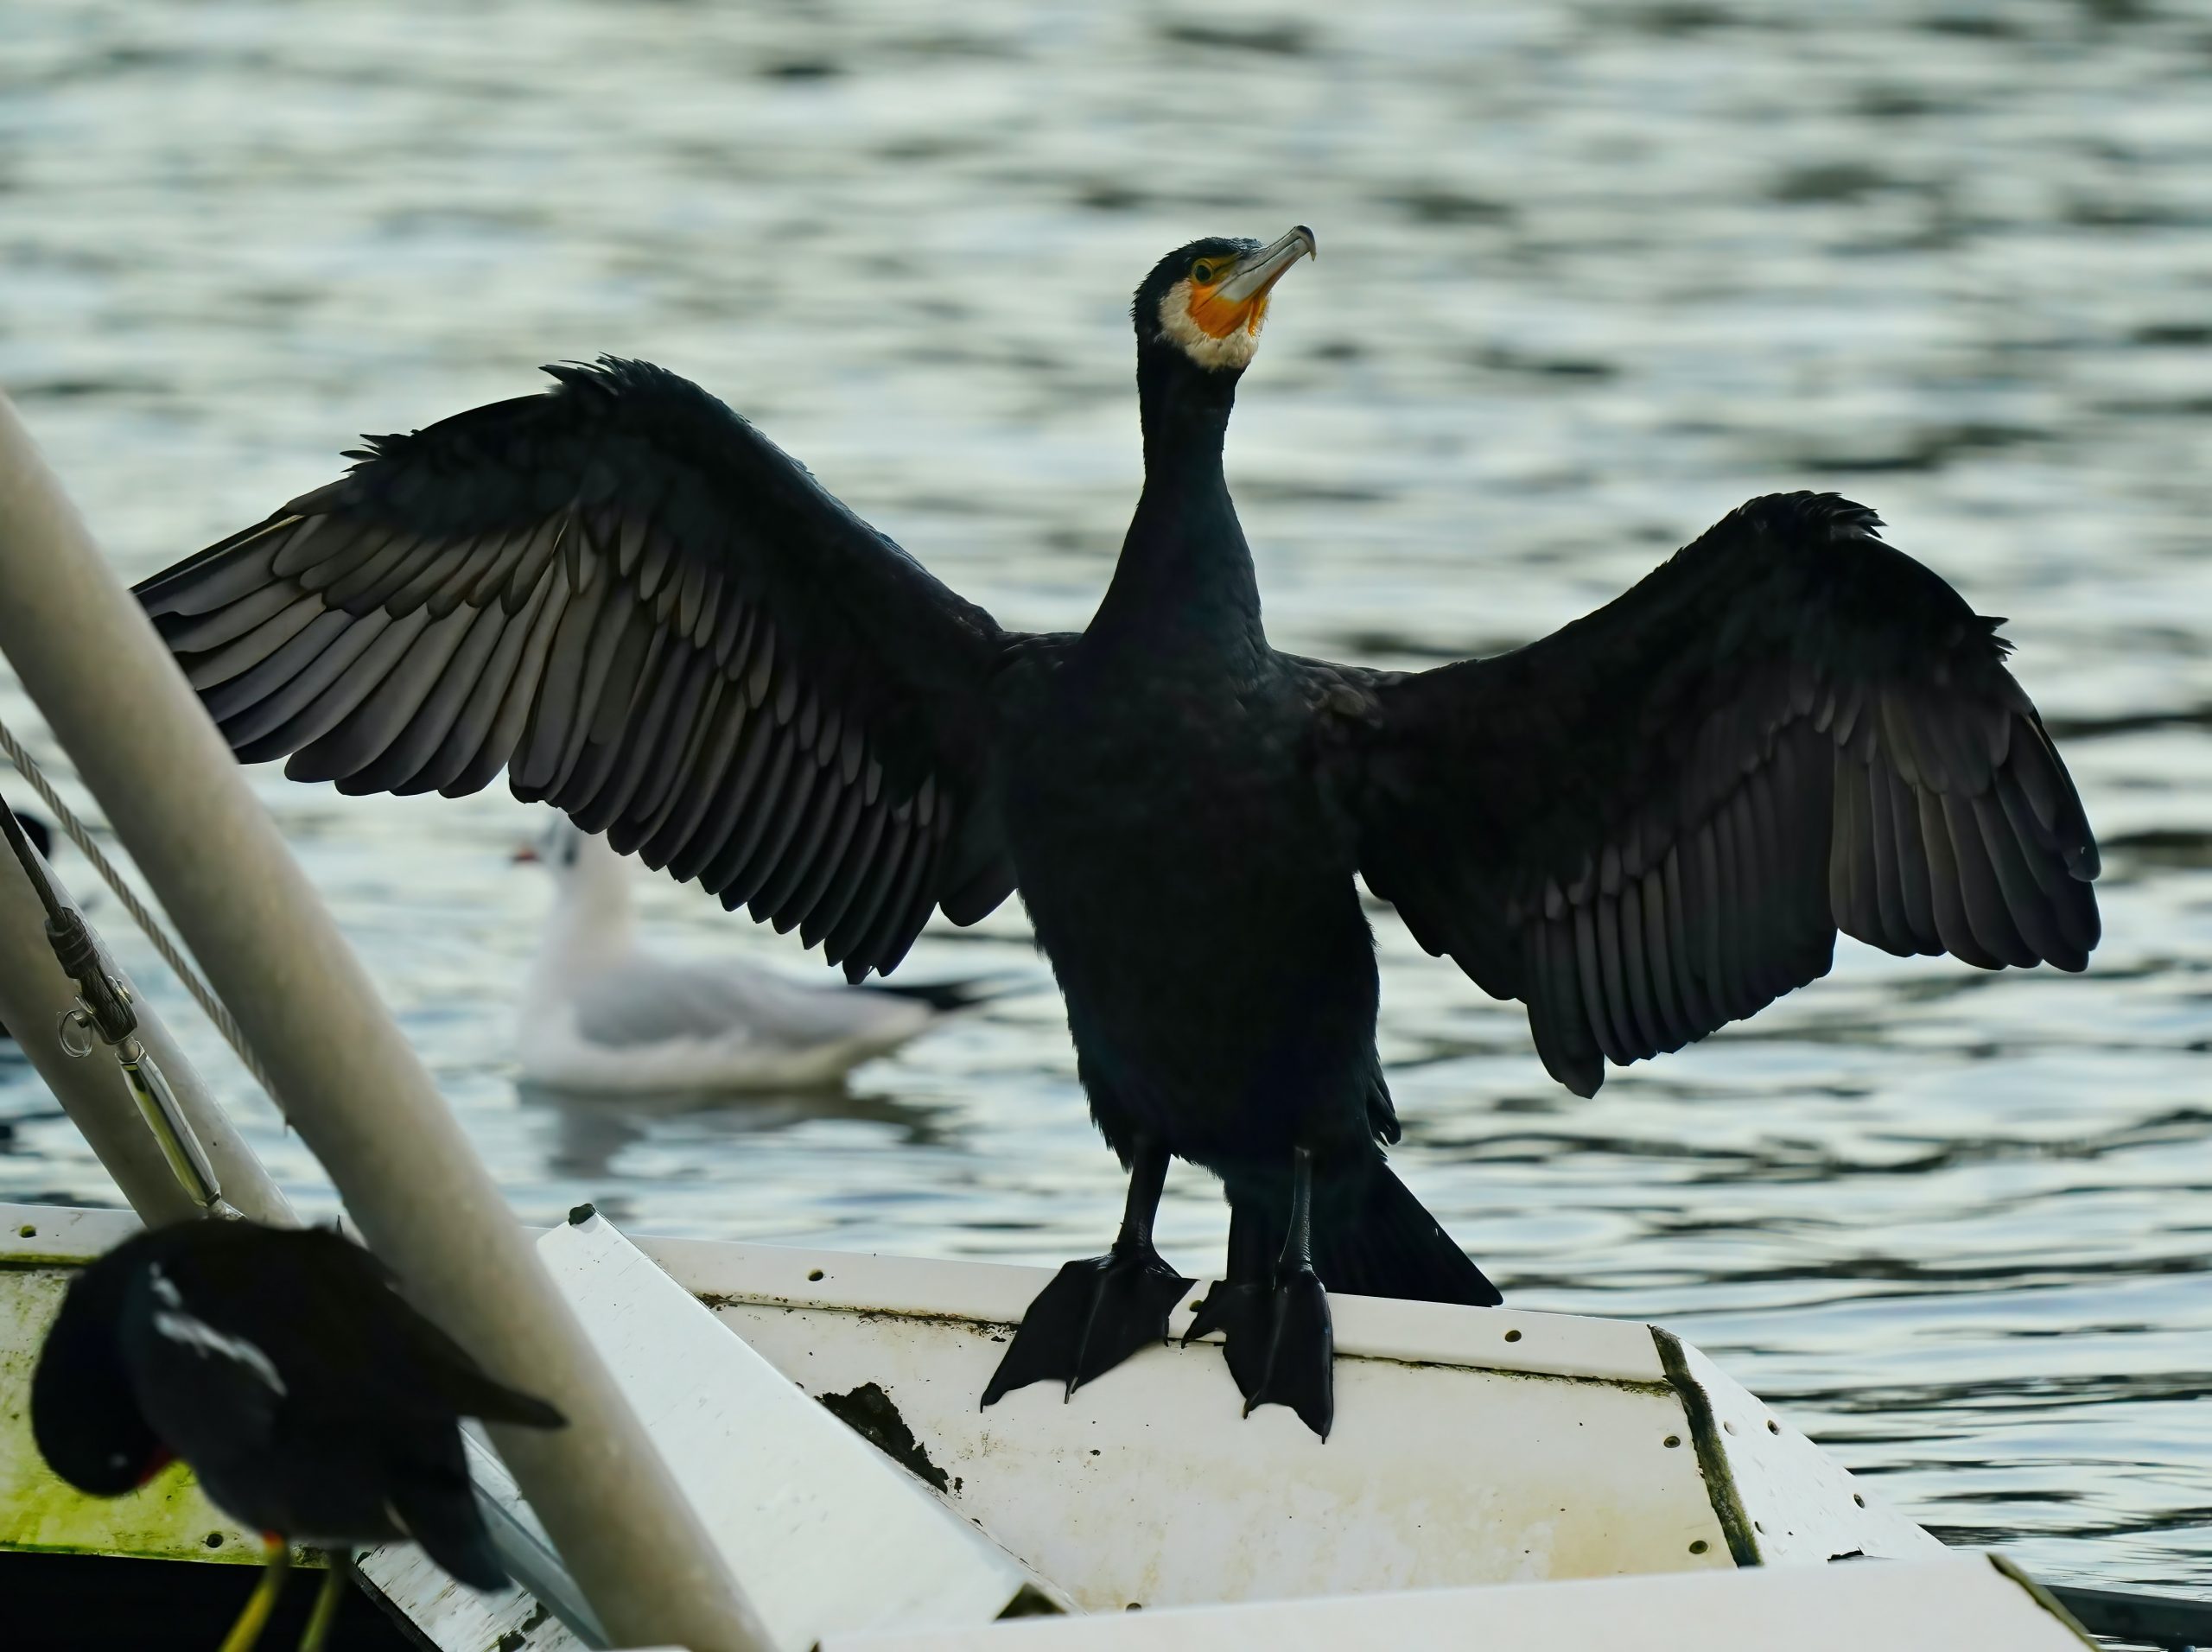 Black Cormorant bird in La Jolla with wings outstretched and webbed feet perched on the side of a boat